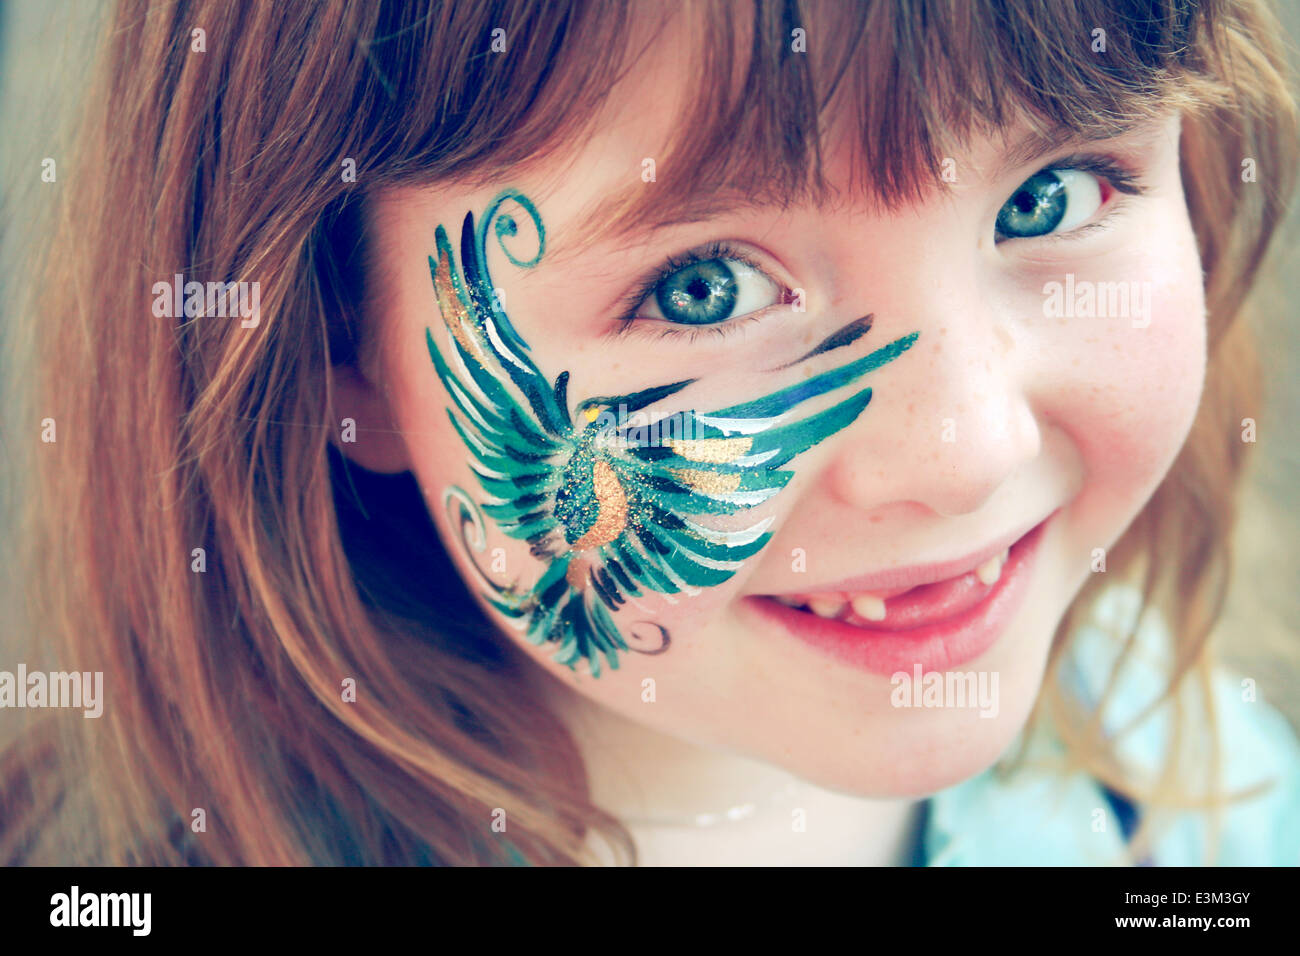 Portrait of girl (8-9) with face paint Stock Photo